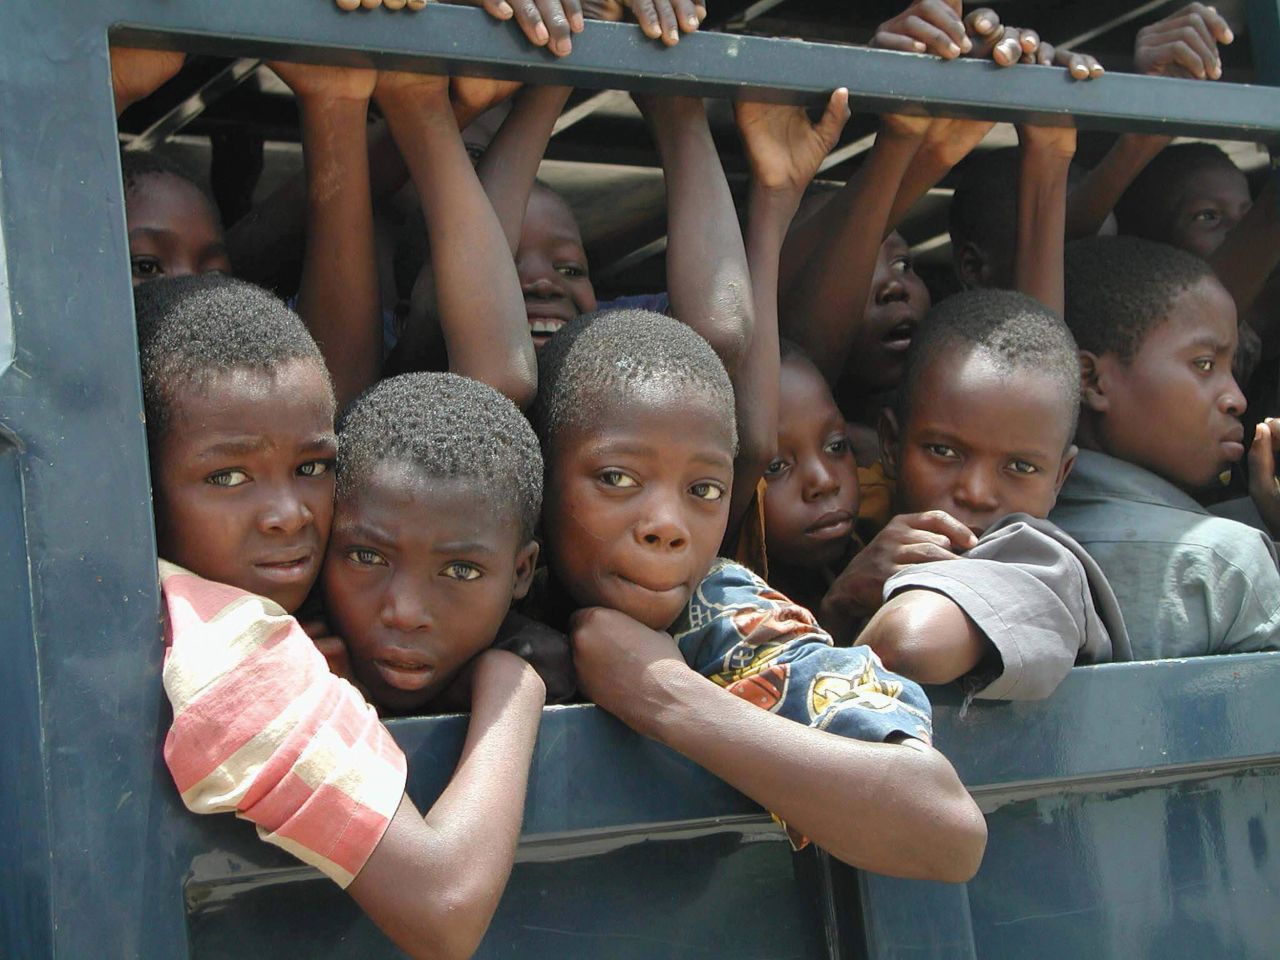 Dozens of slave children ride in the back of a police vehicle after they were apprehended at Seme Border, Nigeria. Much slavery in Nigeria and neighboring Benin involves the trafficking of women and children for sexual exploitation, domestic work or forced labor.